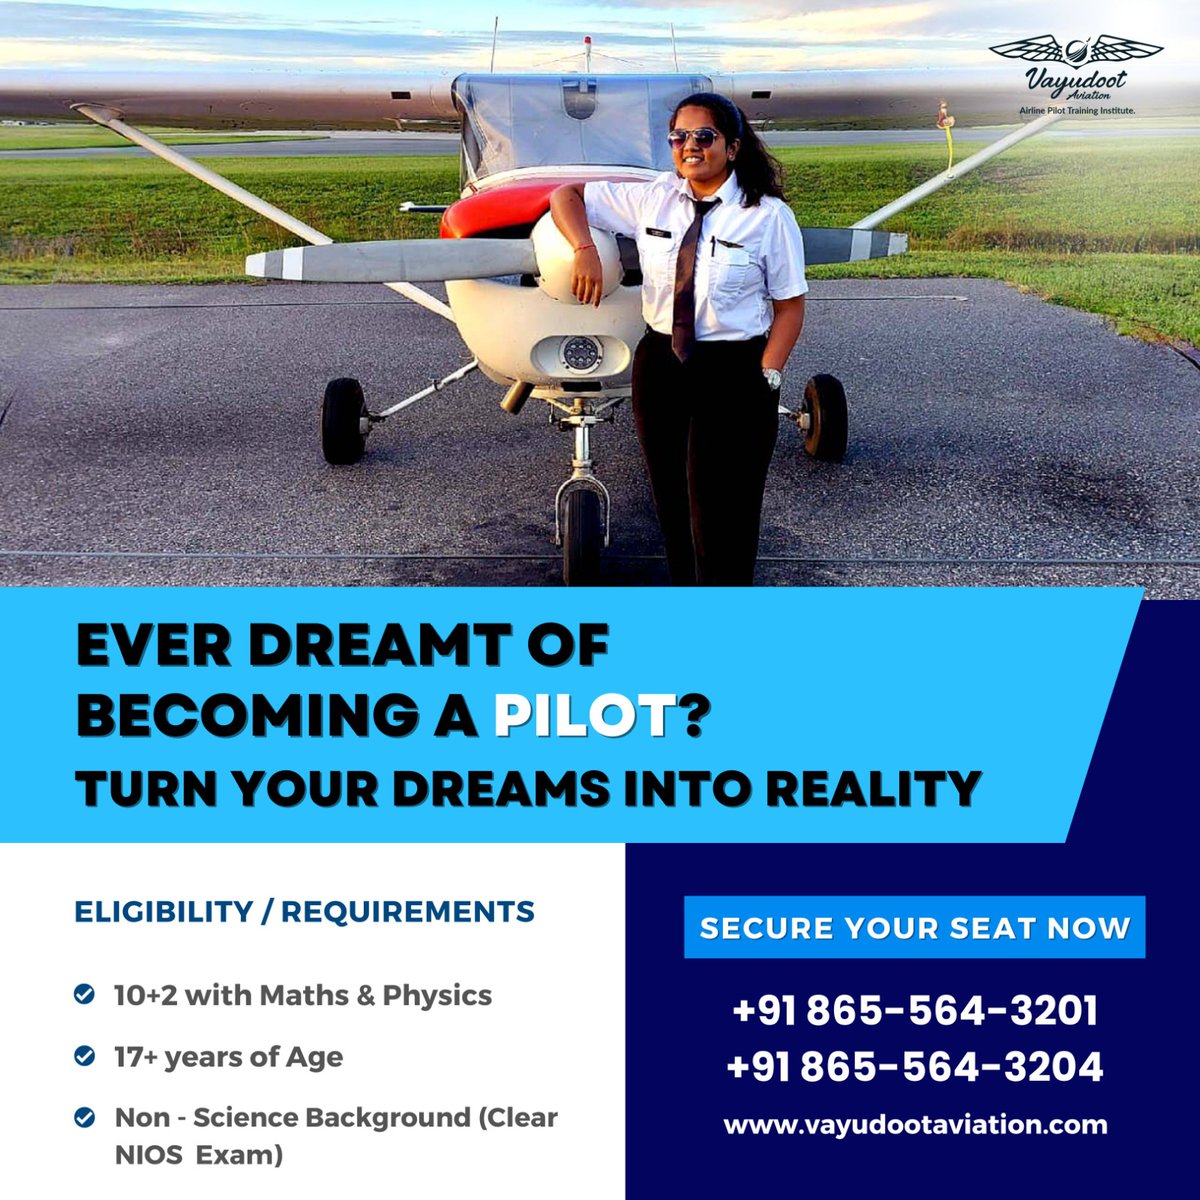 Calling all future aviators! 📢 Embark on your pilot journey now.

What makes us stand out :
✈️ Affordable fees
✈️ Professional Instructors

For more :
☎️ +91 8655643201 / 8655643204
🌐vayudootaviation.com

#vayudootavaiation #cpl #pilottraining #Avgeek #dgca.